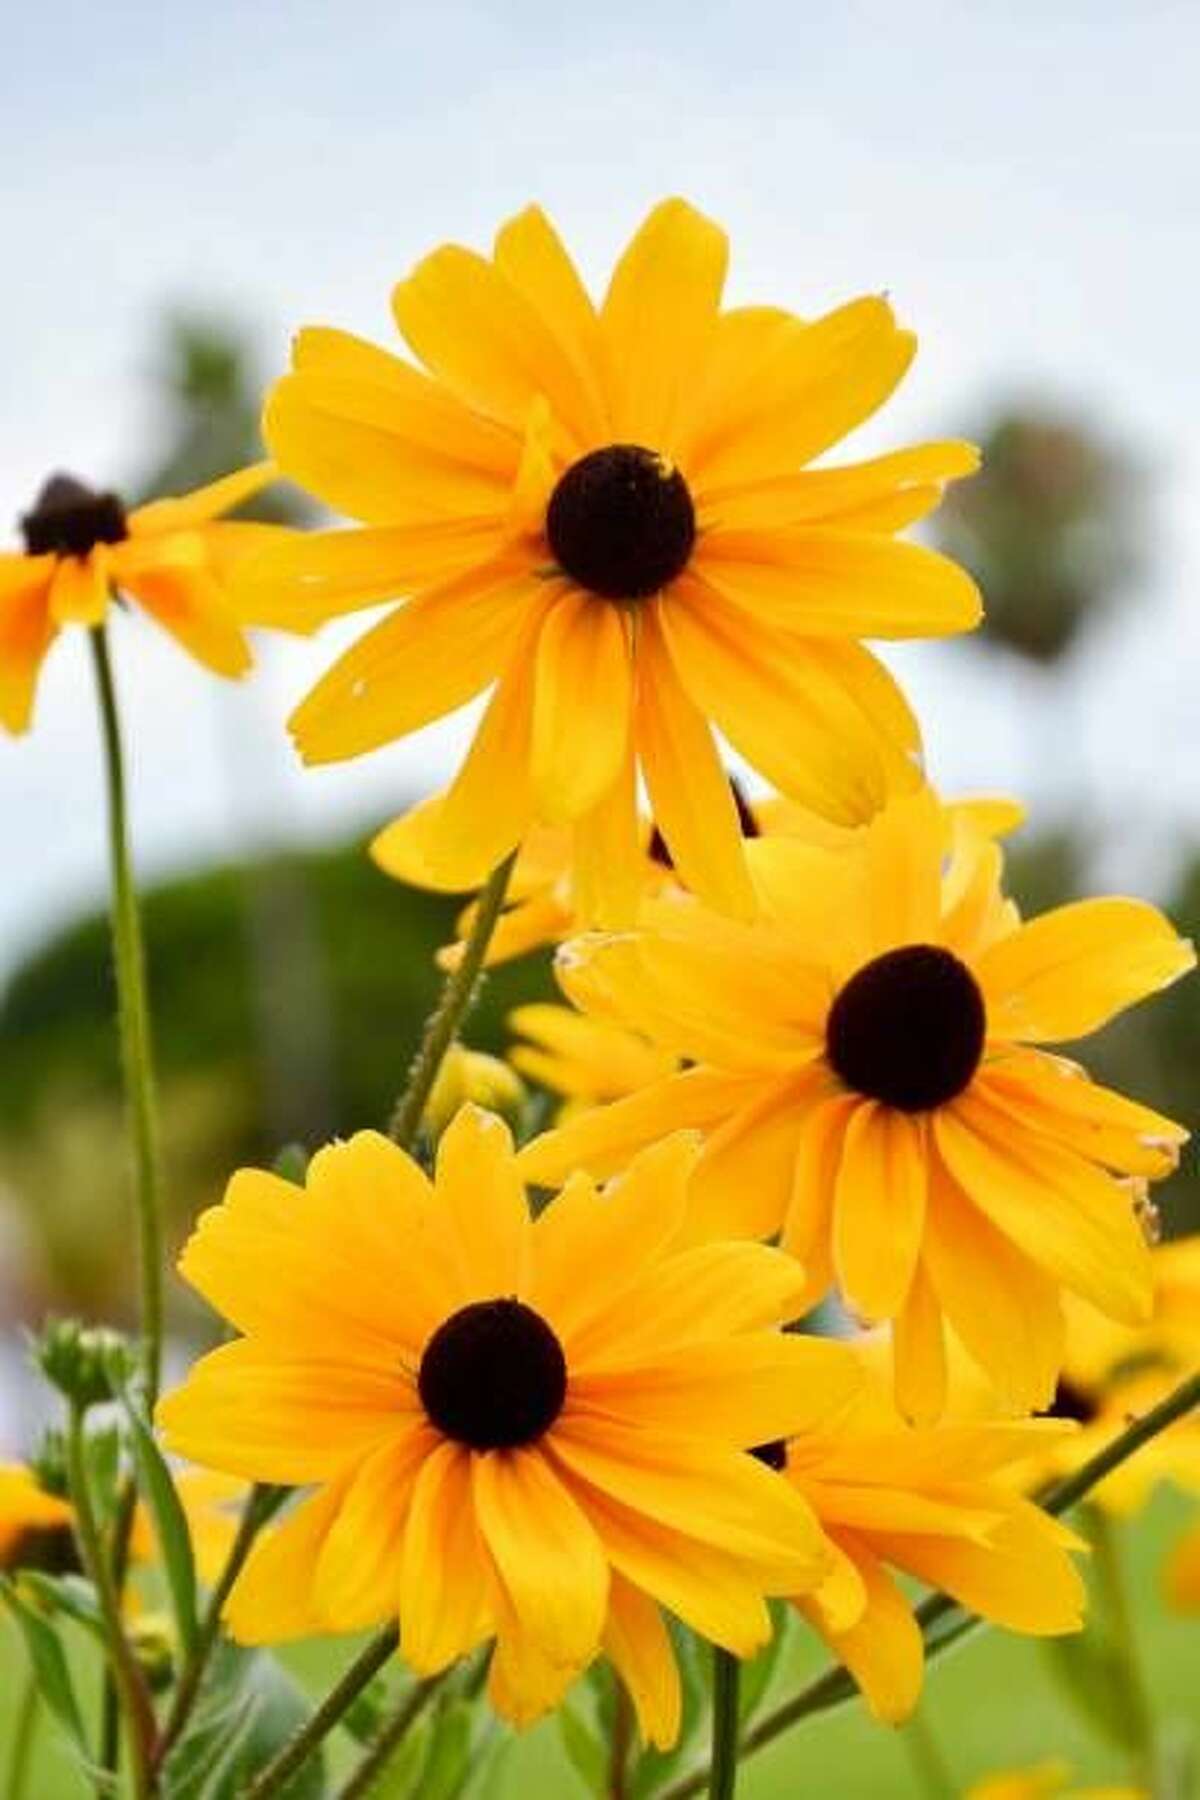 Black-eyed Susan: When it blooms: Late summer to early fall Why we love it: This sunny flower will make you smile, plus it doesn't need babied because it's drought tolerant and blooms for weeks and weeks. These are all the reasons you need this late season bloomer in your garden. Be sure to choose a perennial type.